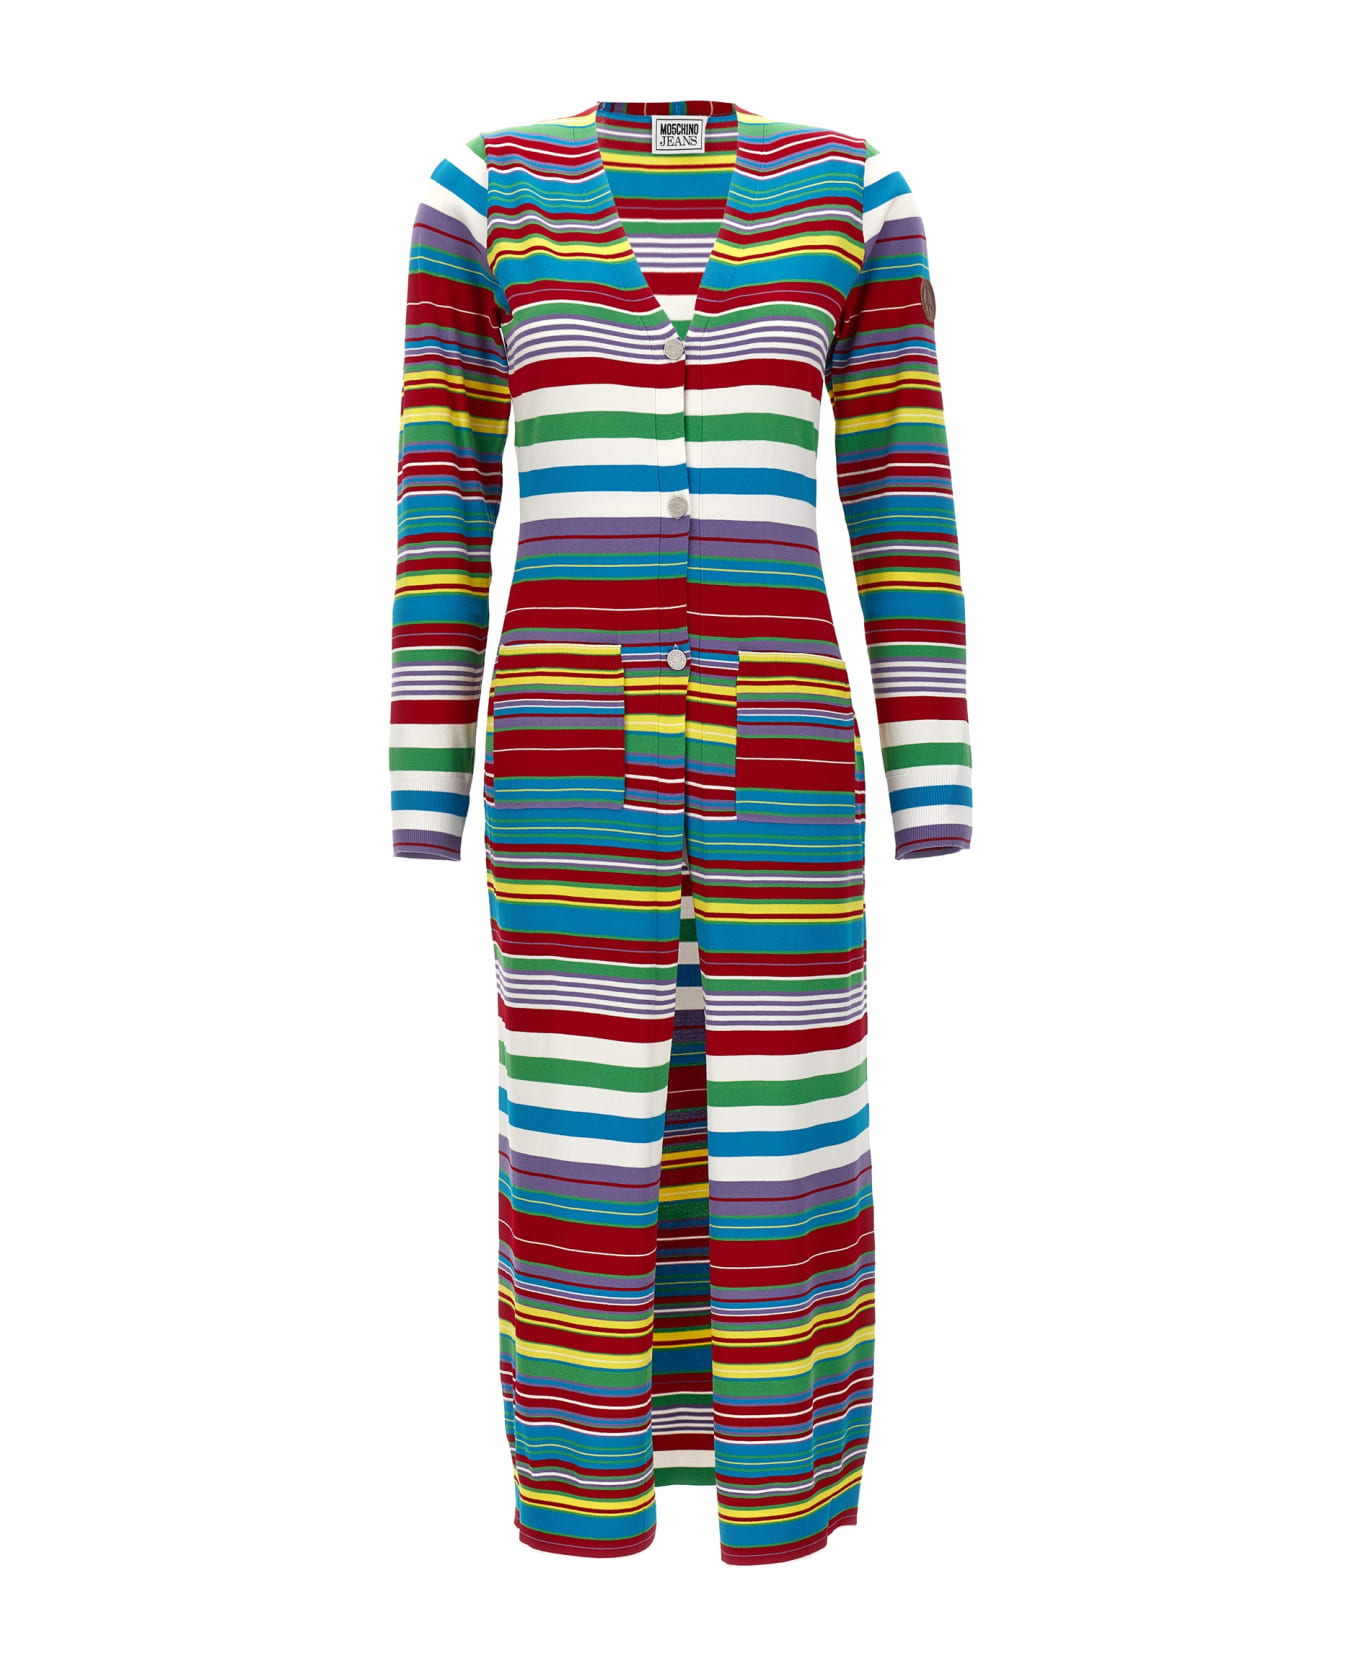 M05CH1N0 Jeans Striped Cardigan - Multicolor